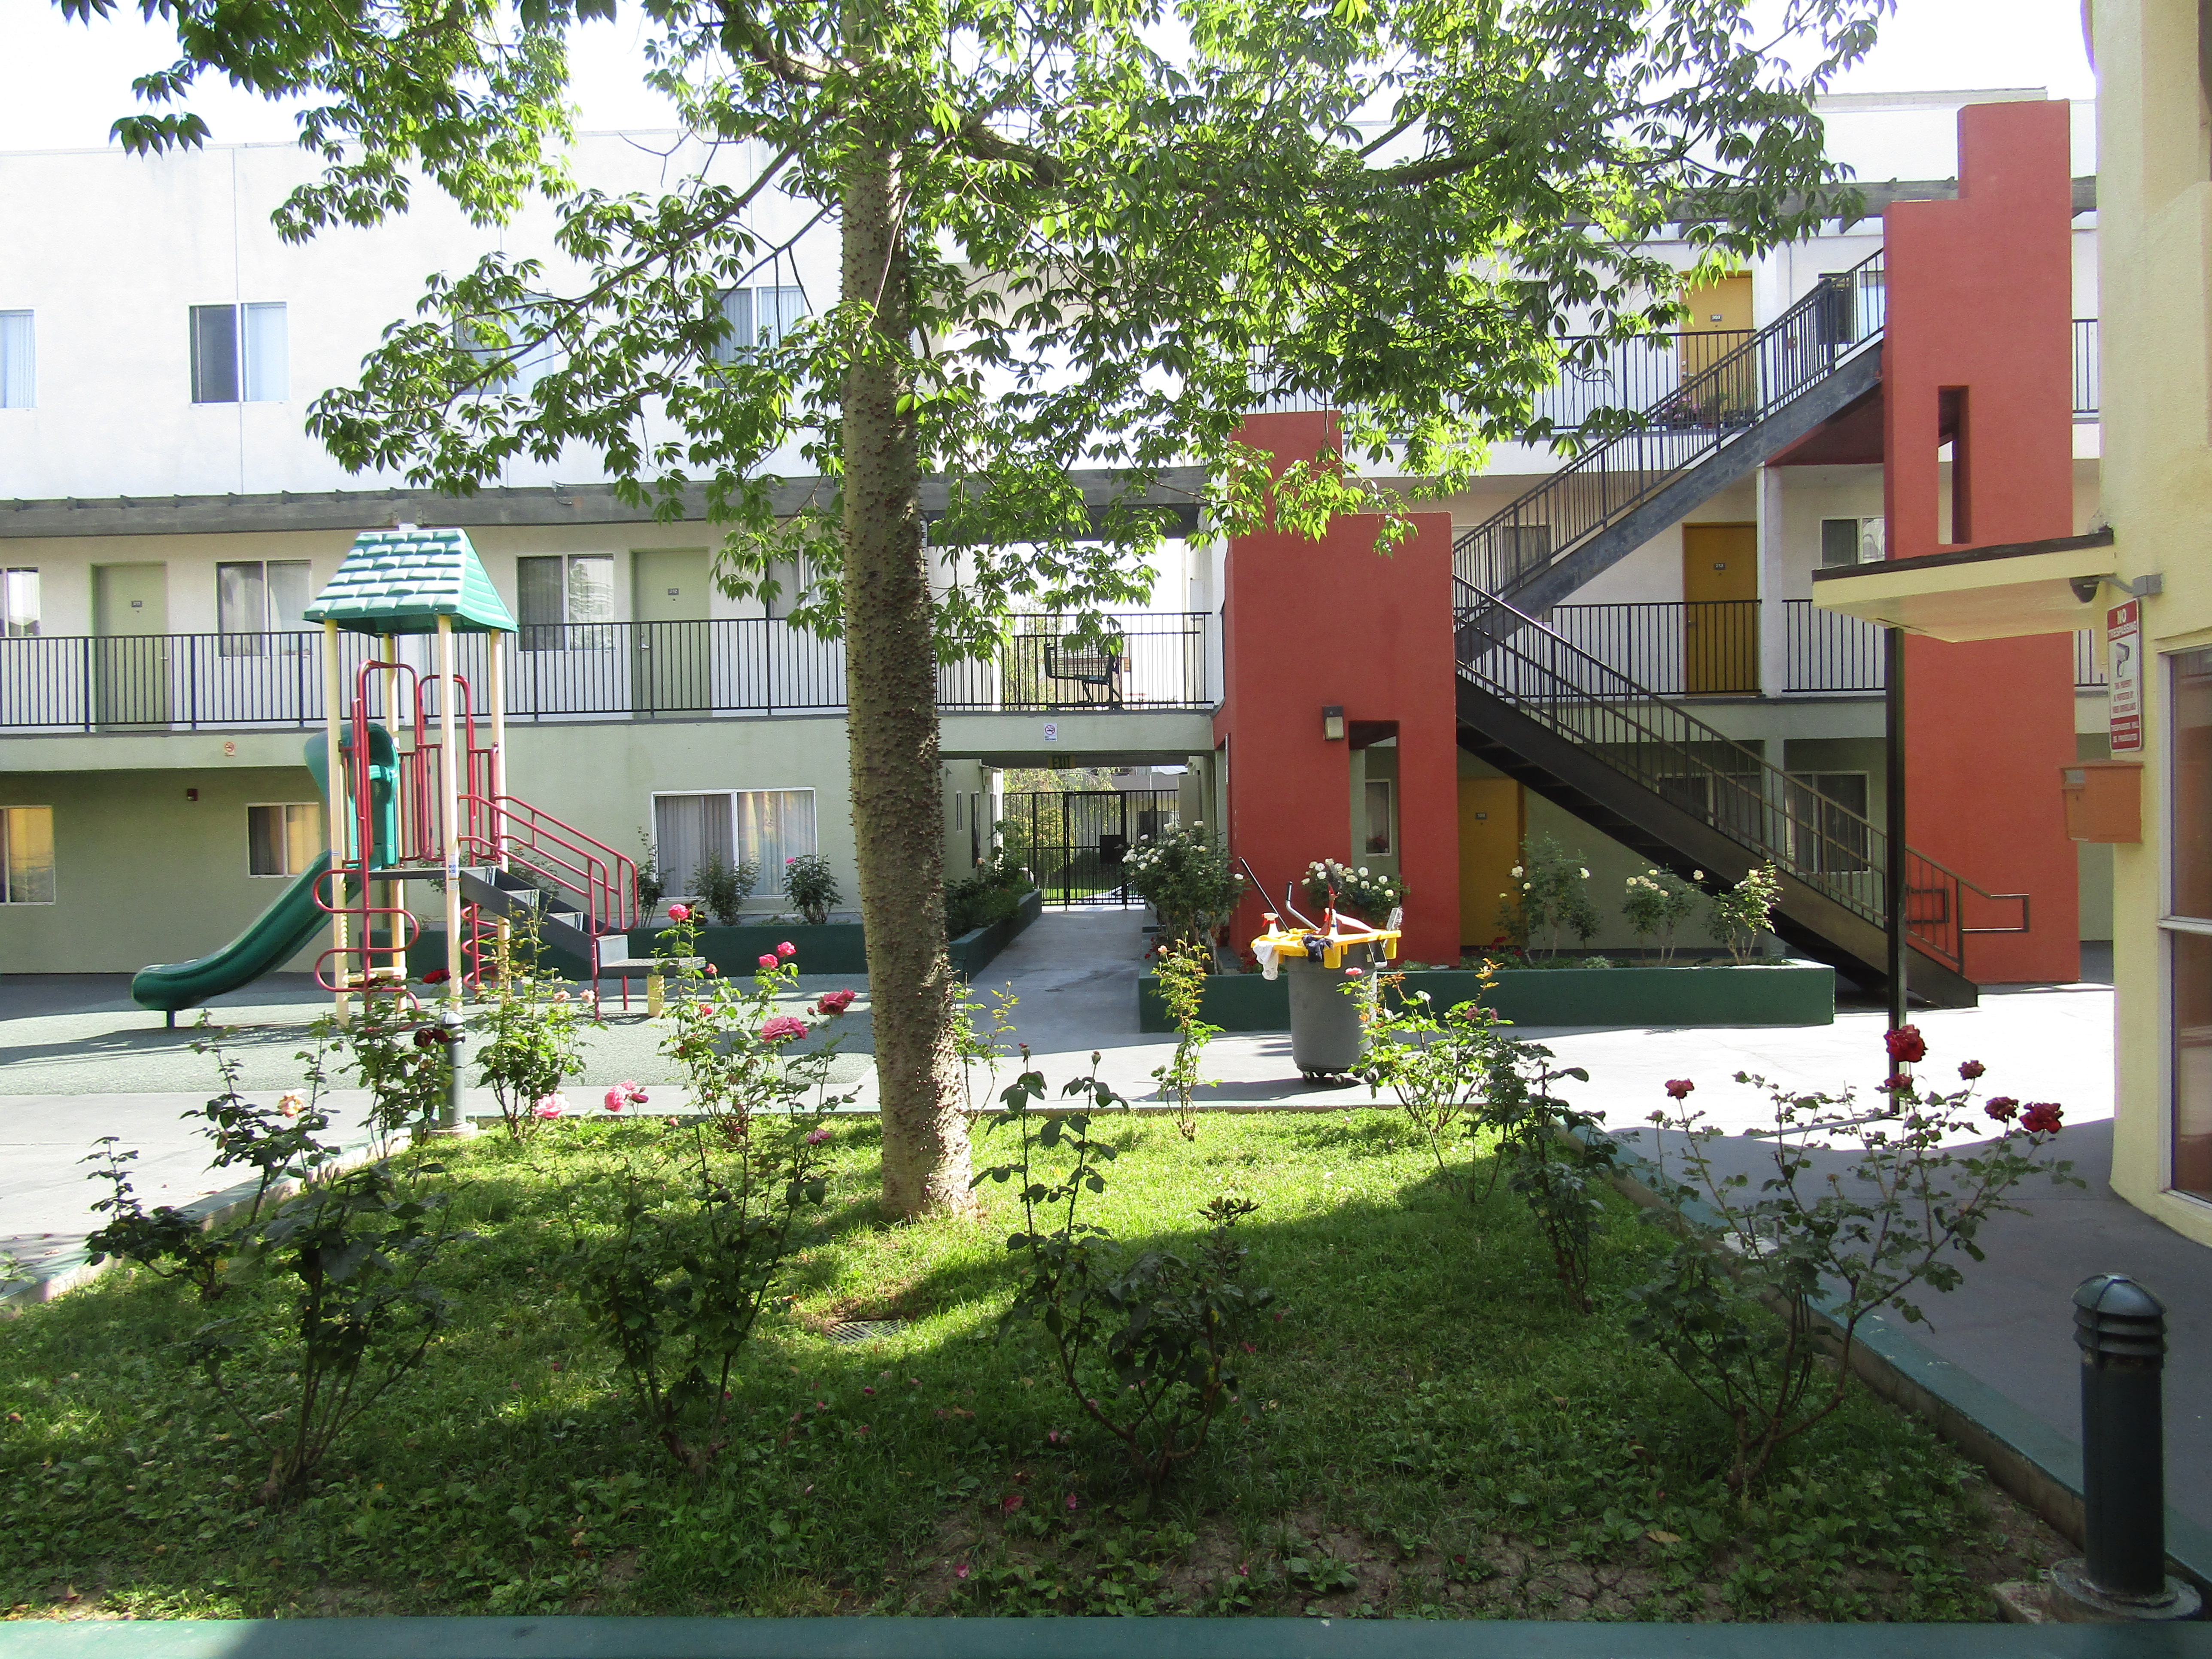 Image of the building courtyard and playground